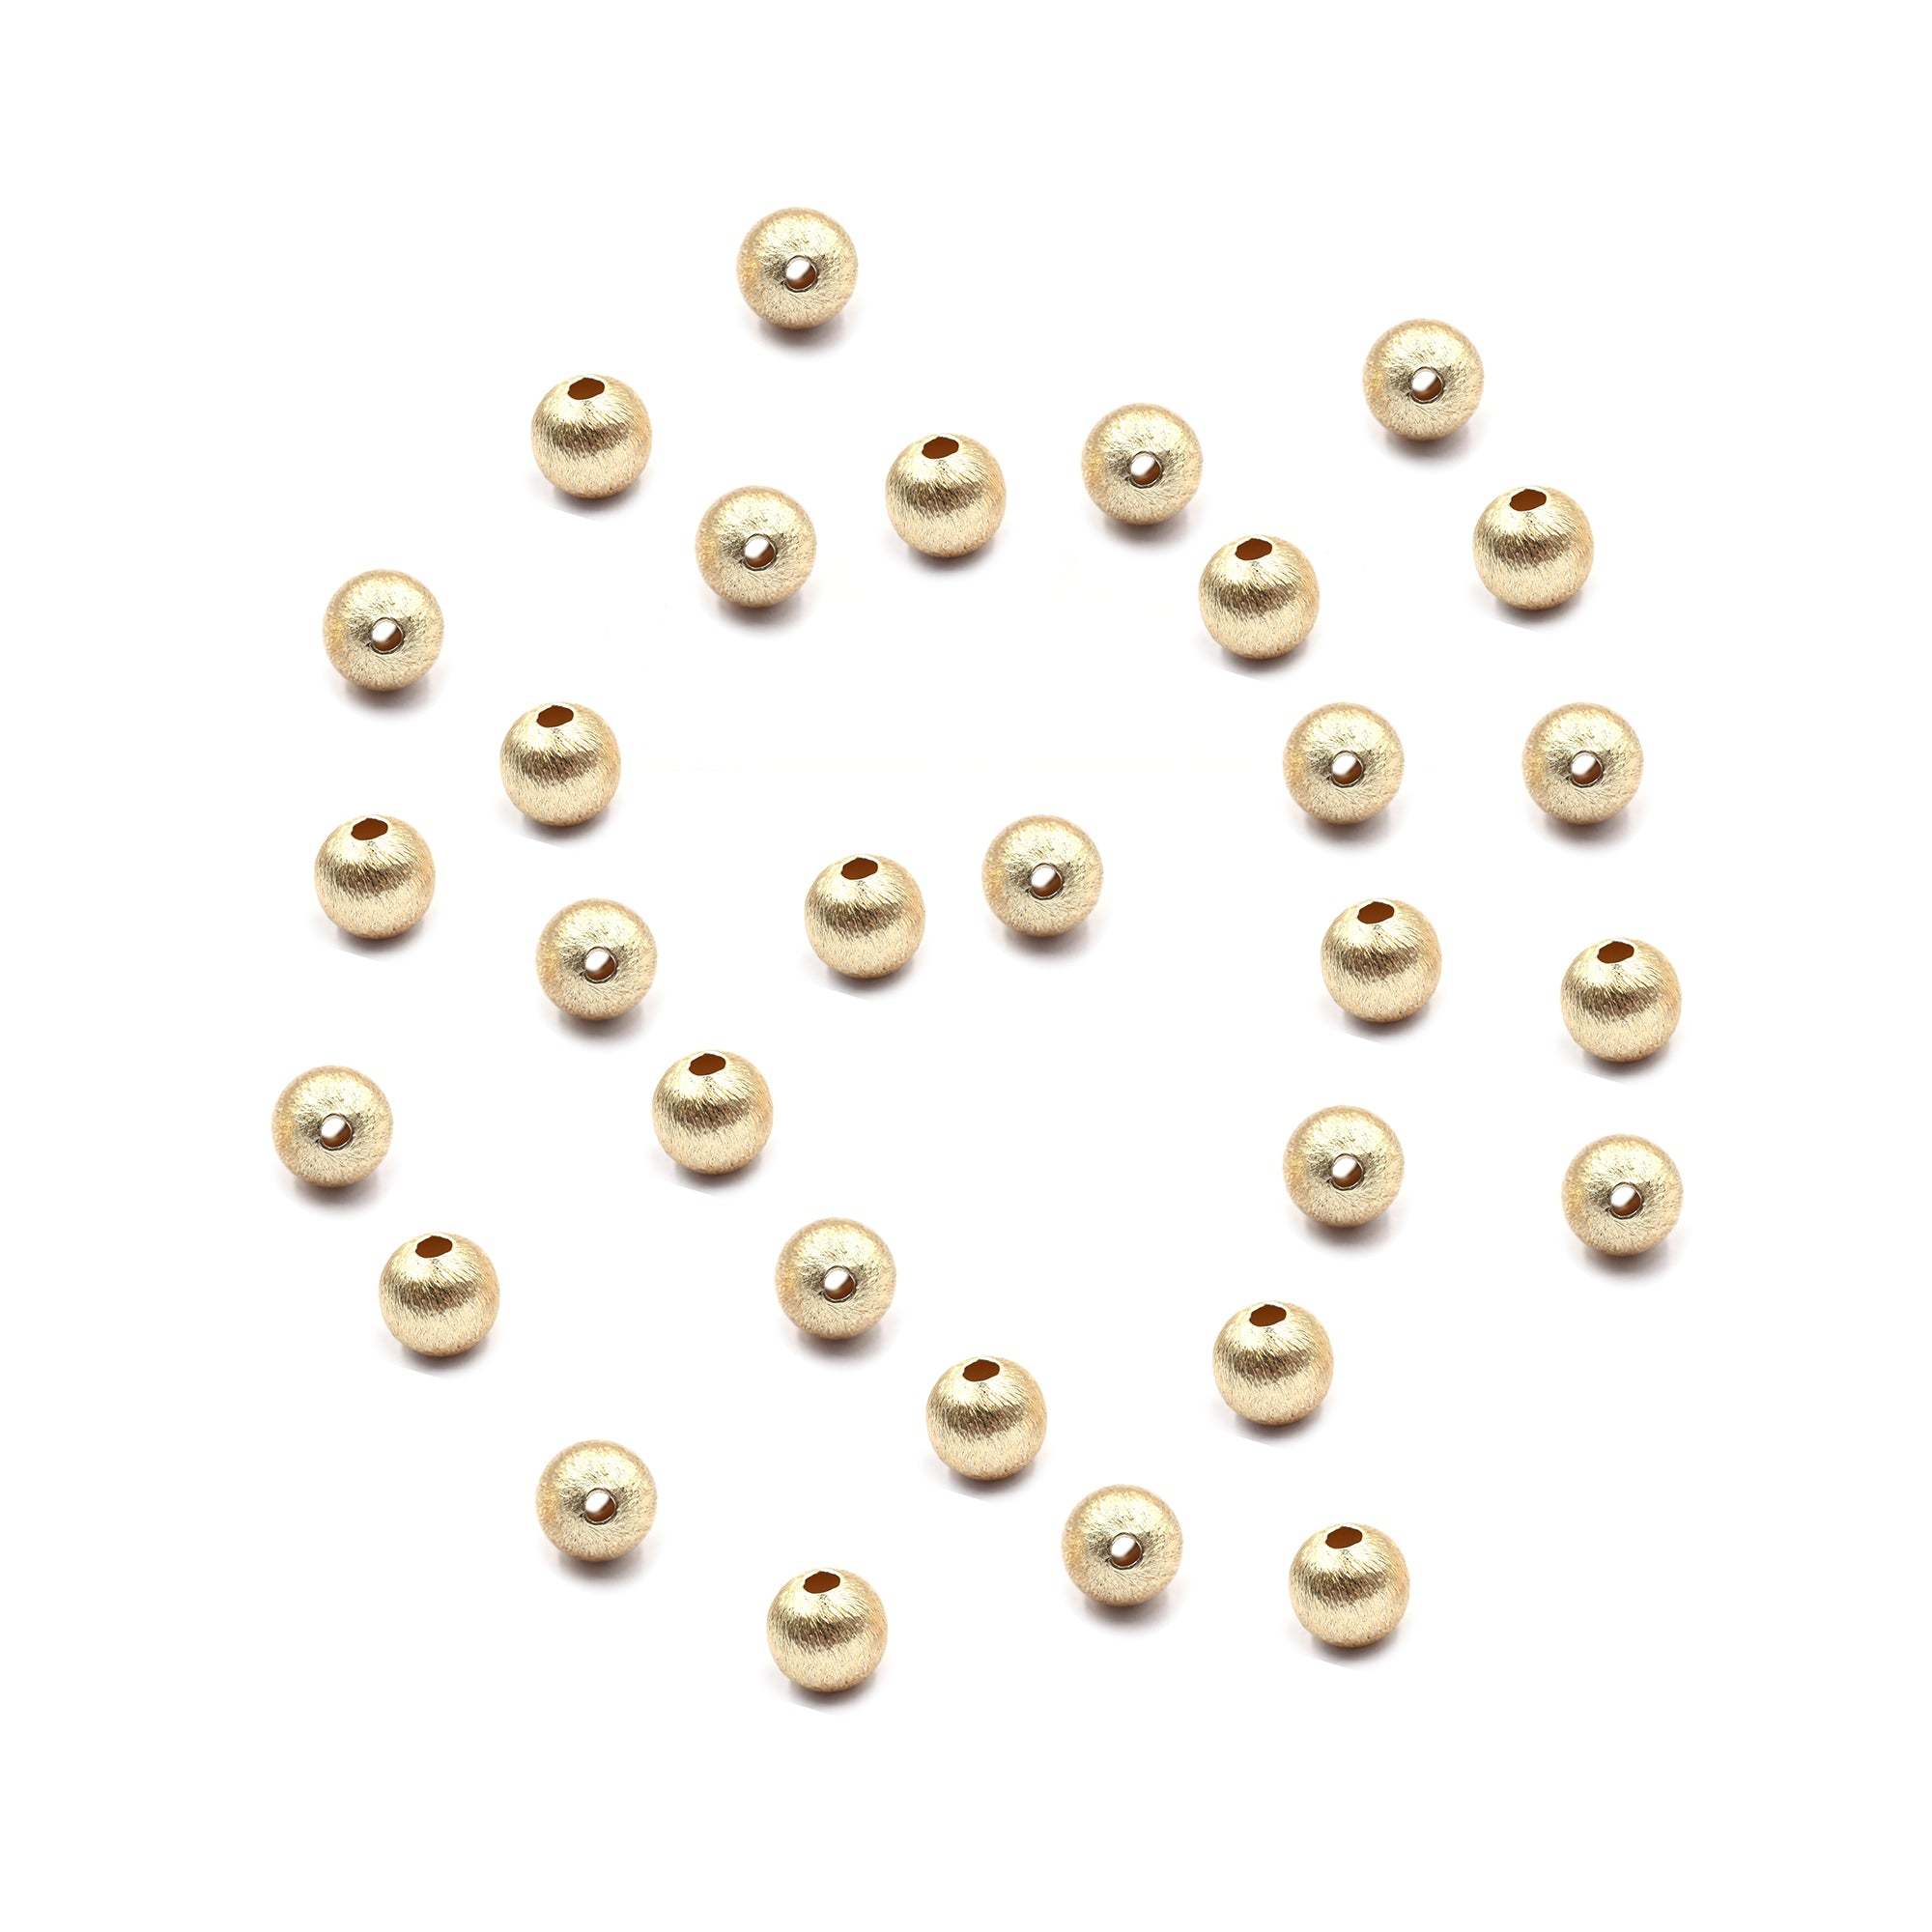 50 Pcs 8mm Spacer Brushed Matte Finish Beads Gold Plated Copper